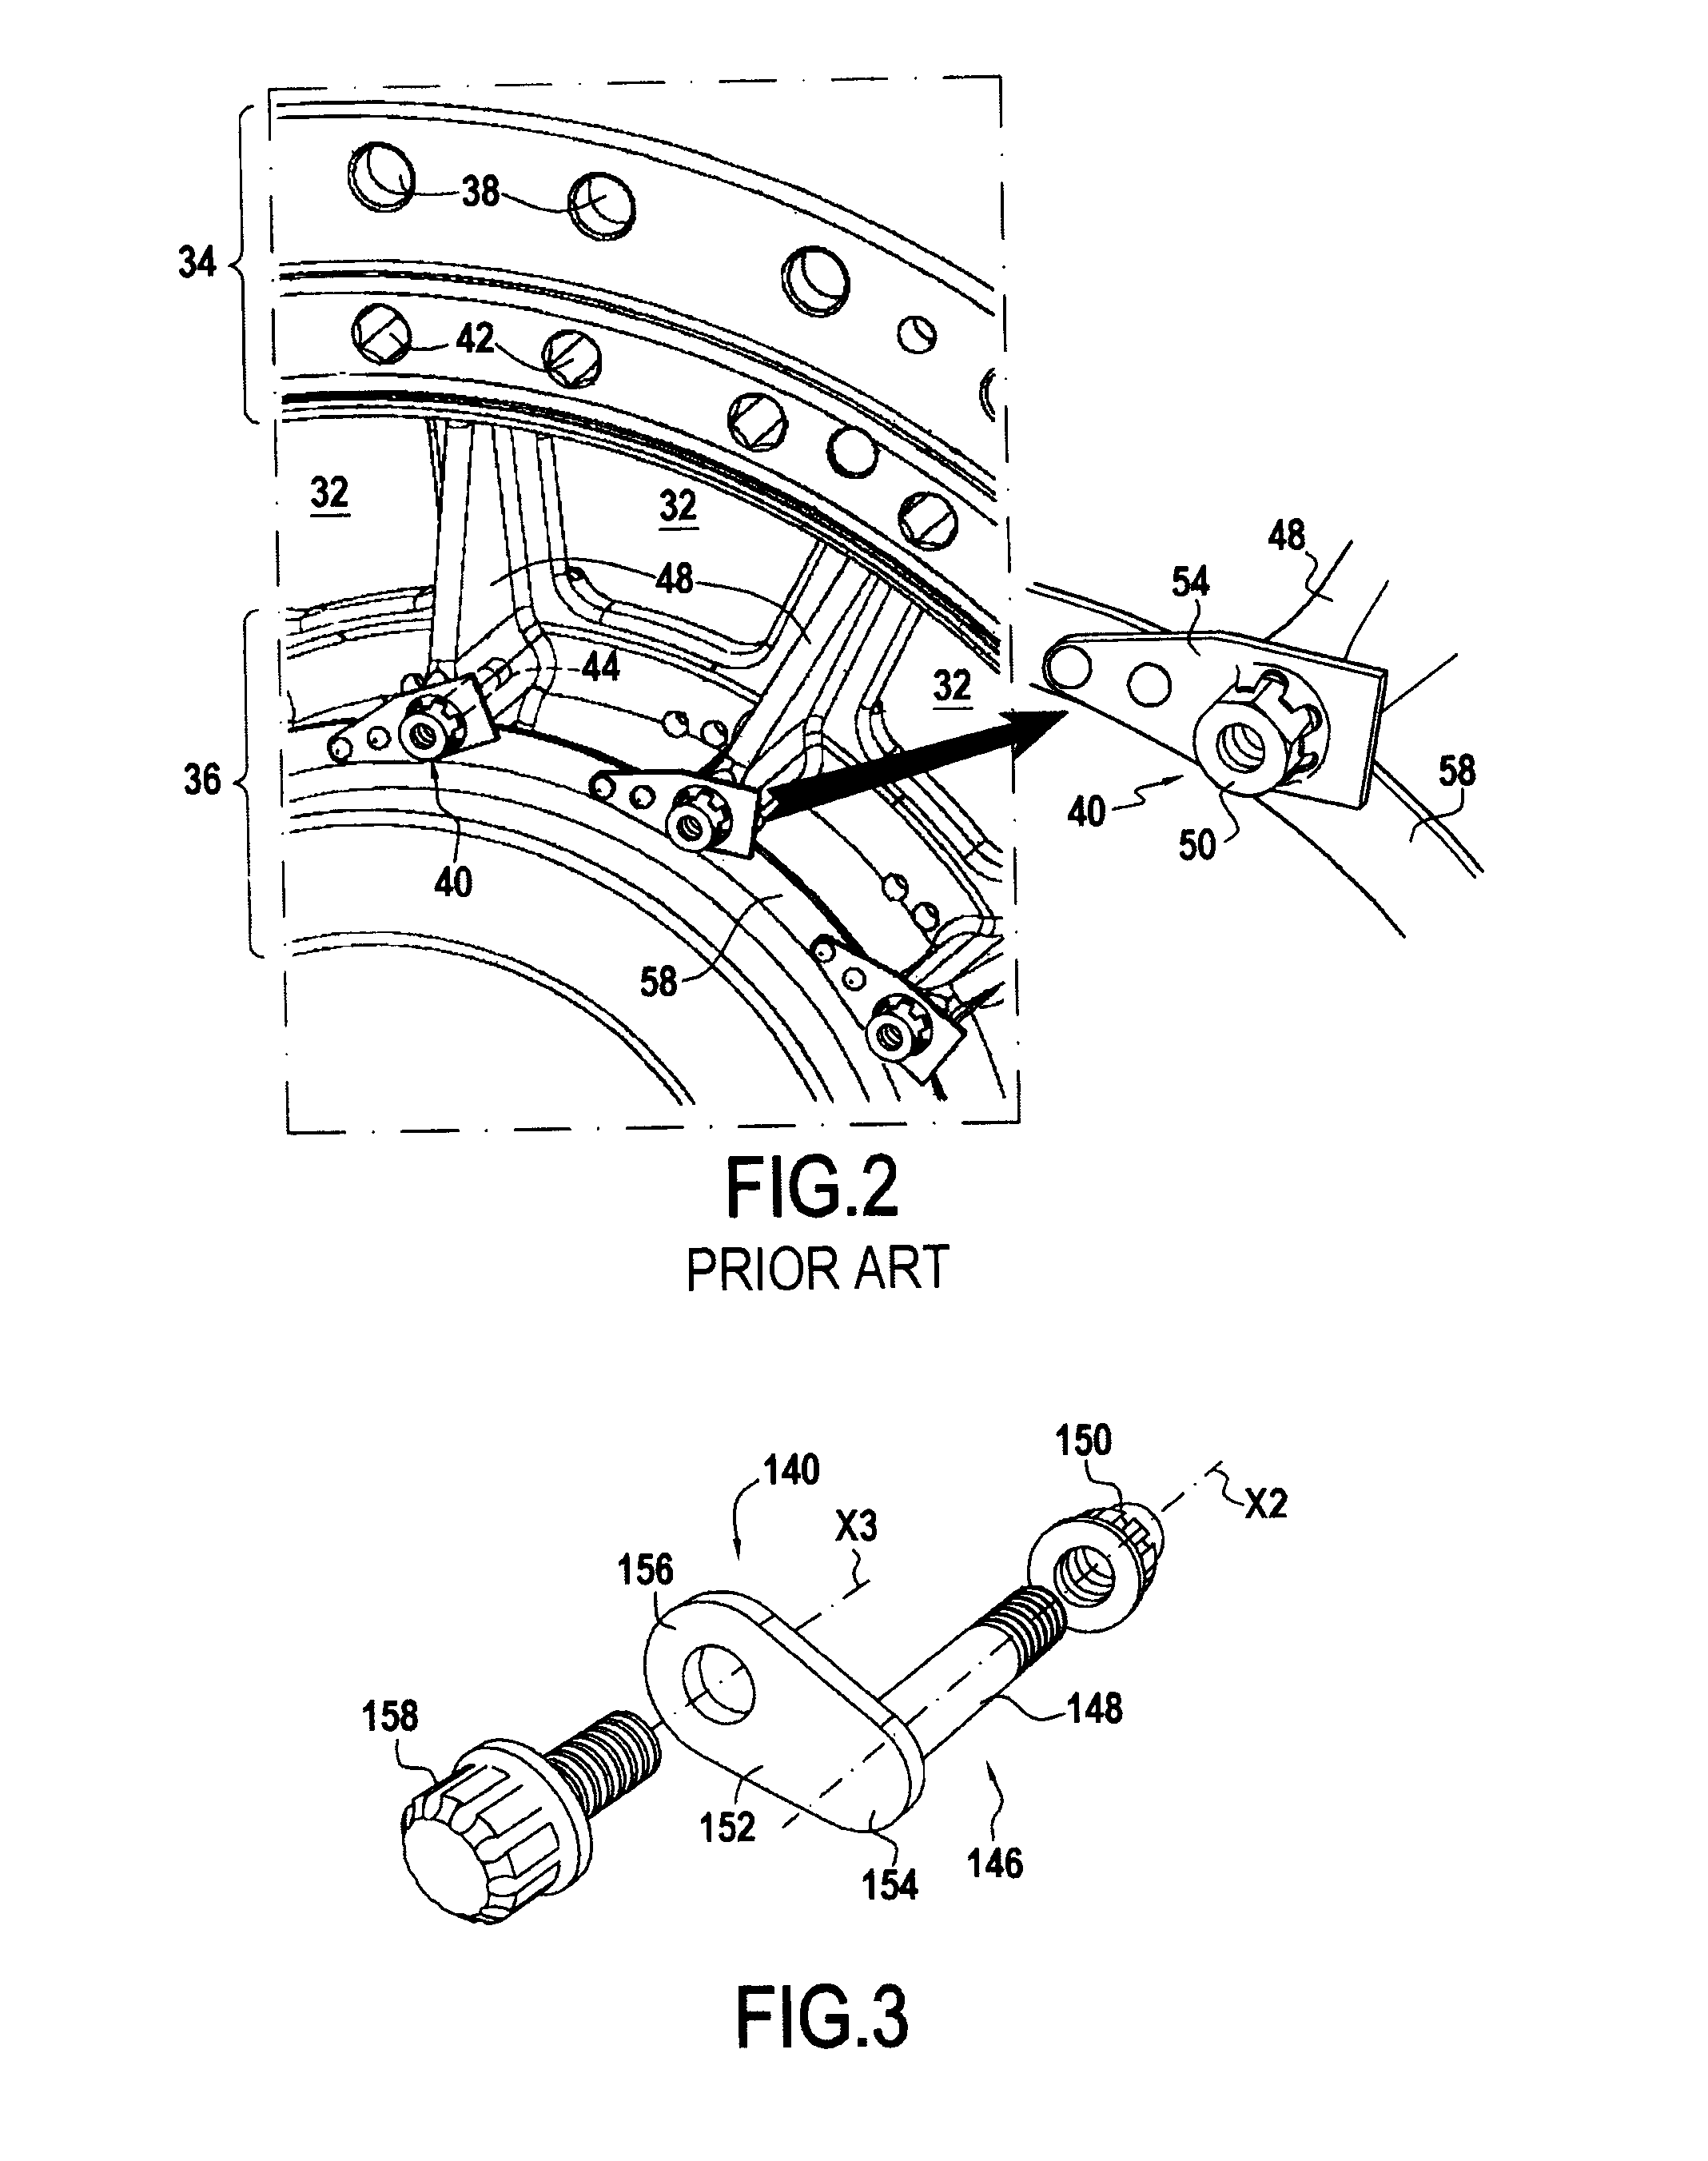 Turbomachine optimized for fastening a rotary shaft bearing. a method of mounting said bearing on said turbomachine